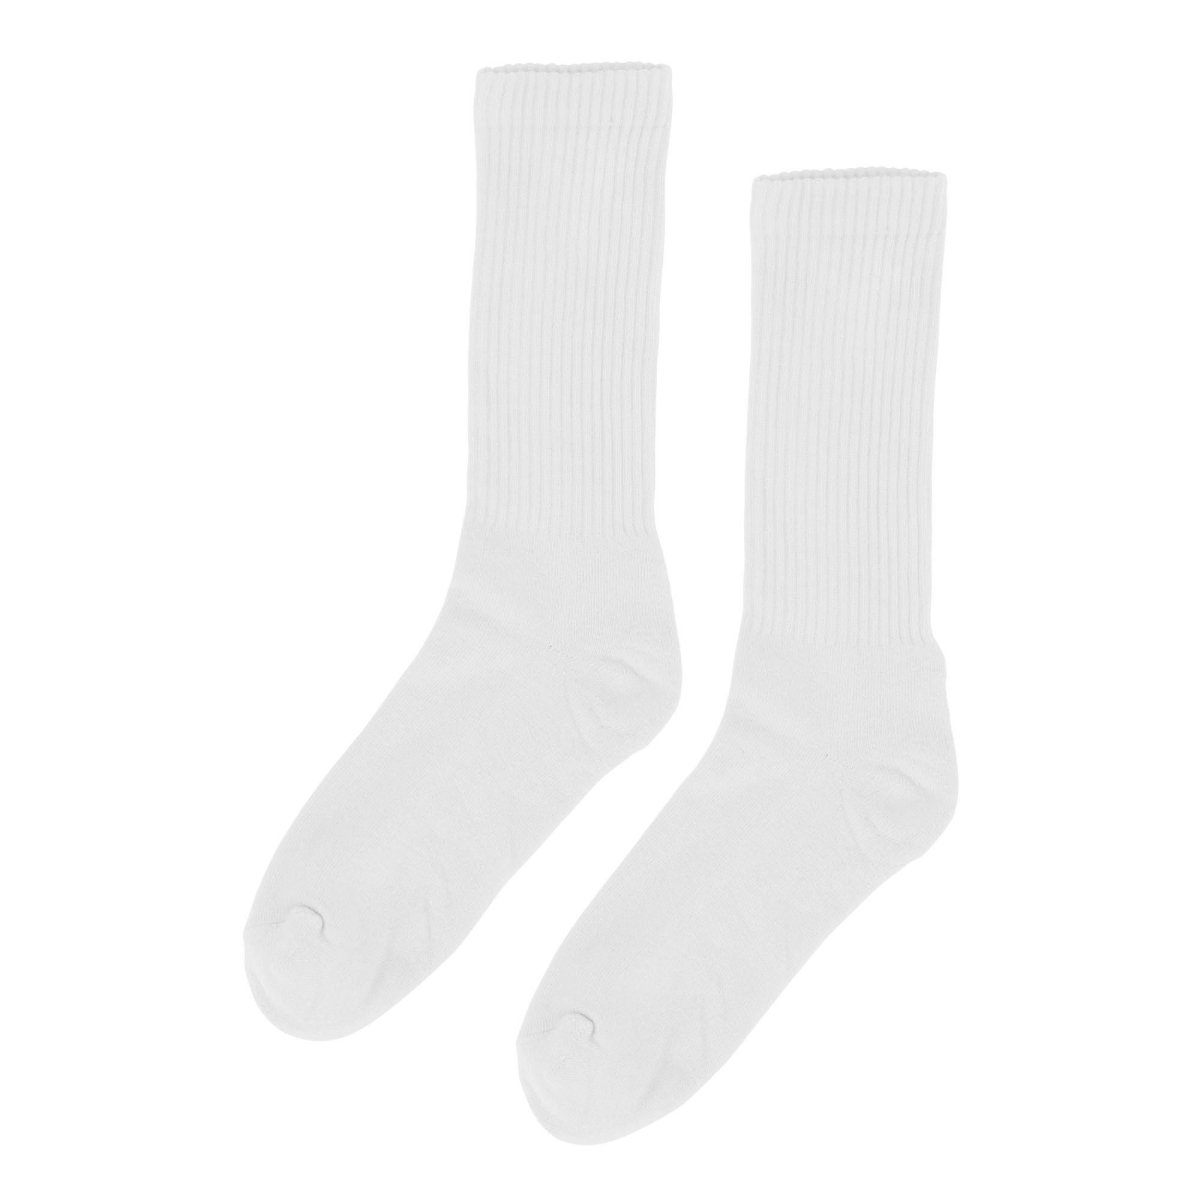 Organic Active Sock Optical White - KYOTO - Colorful Standard